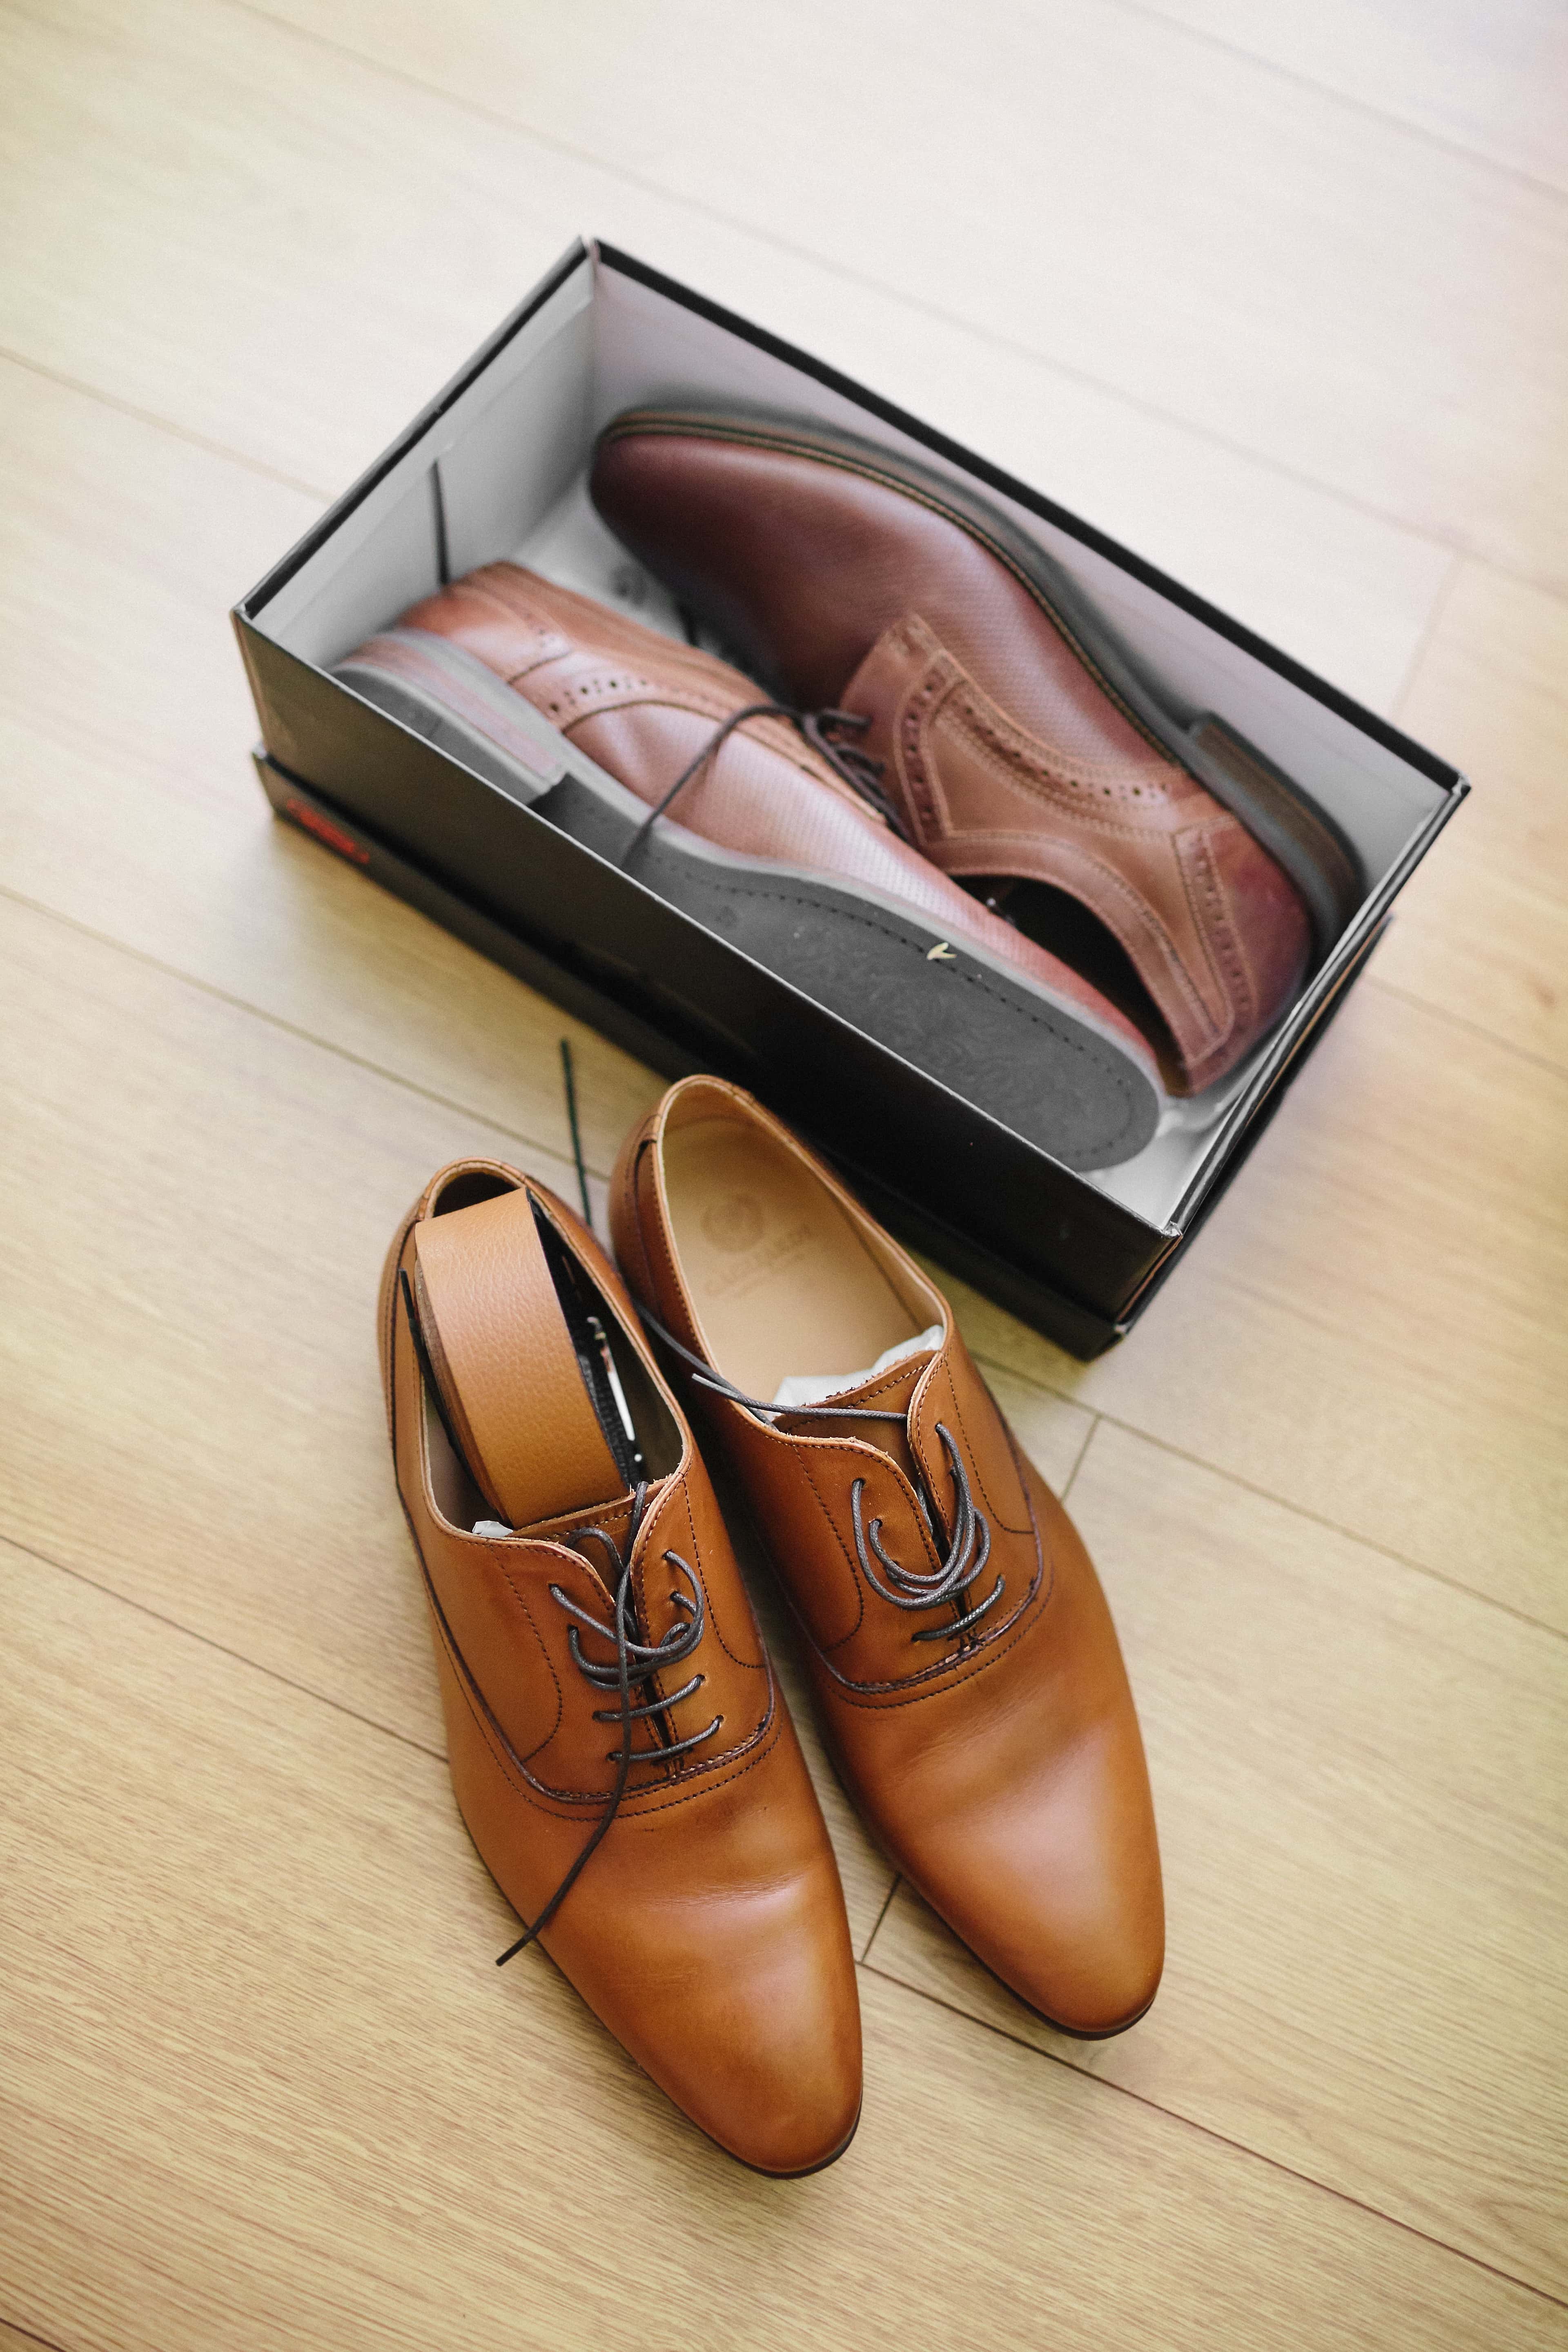 Free picture: shoes, classic, light brown, modern, box, fancy